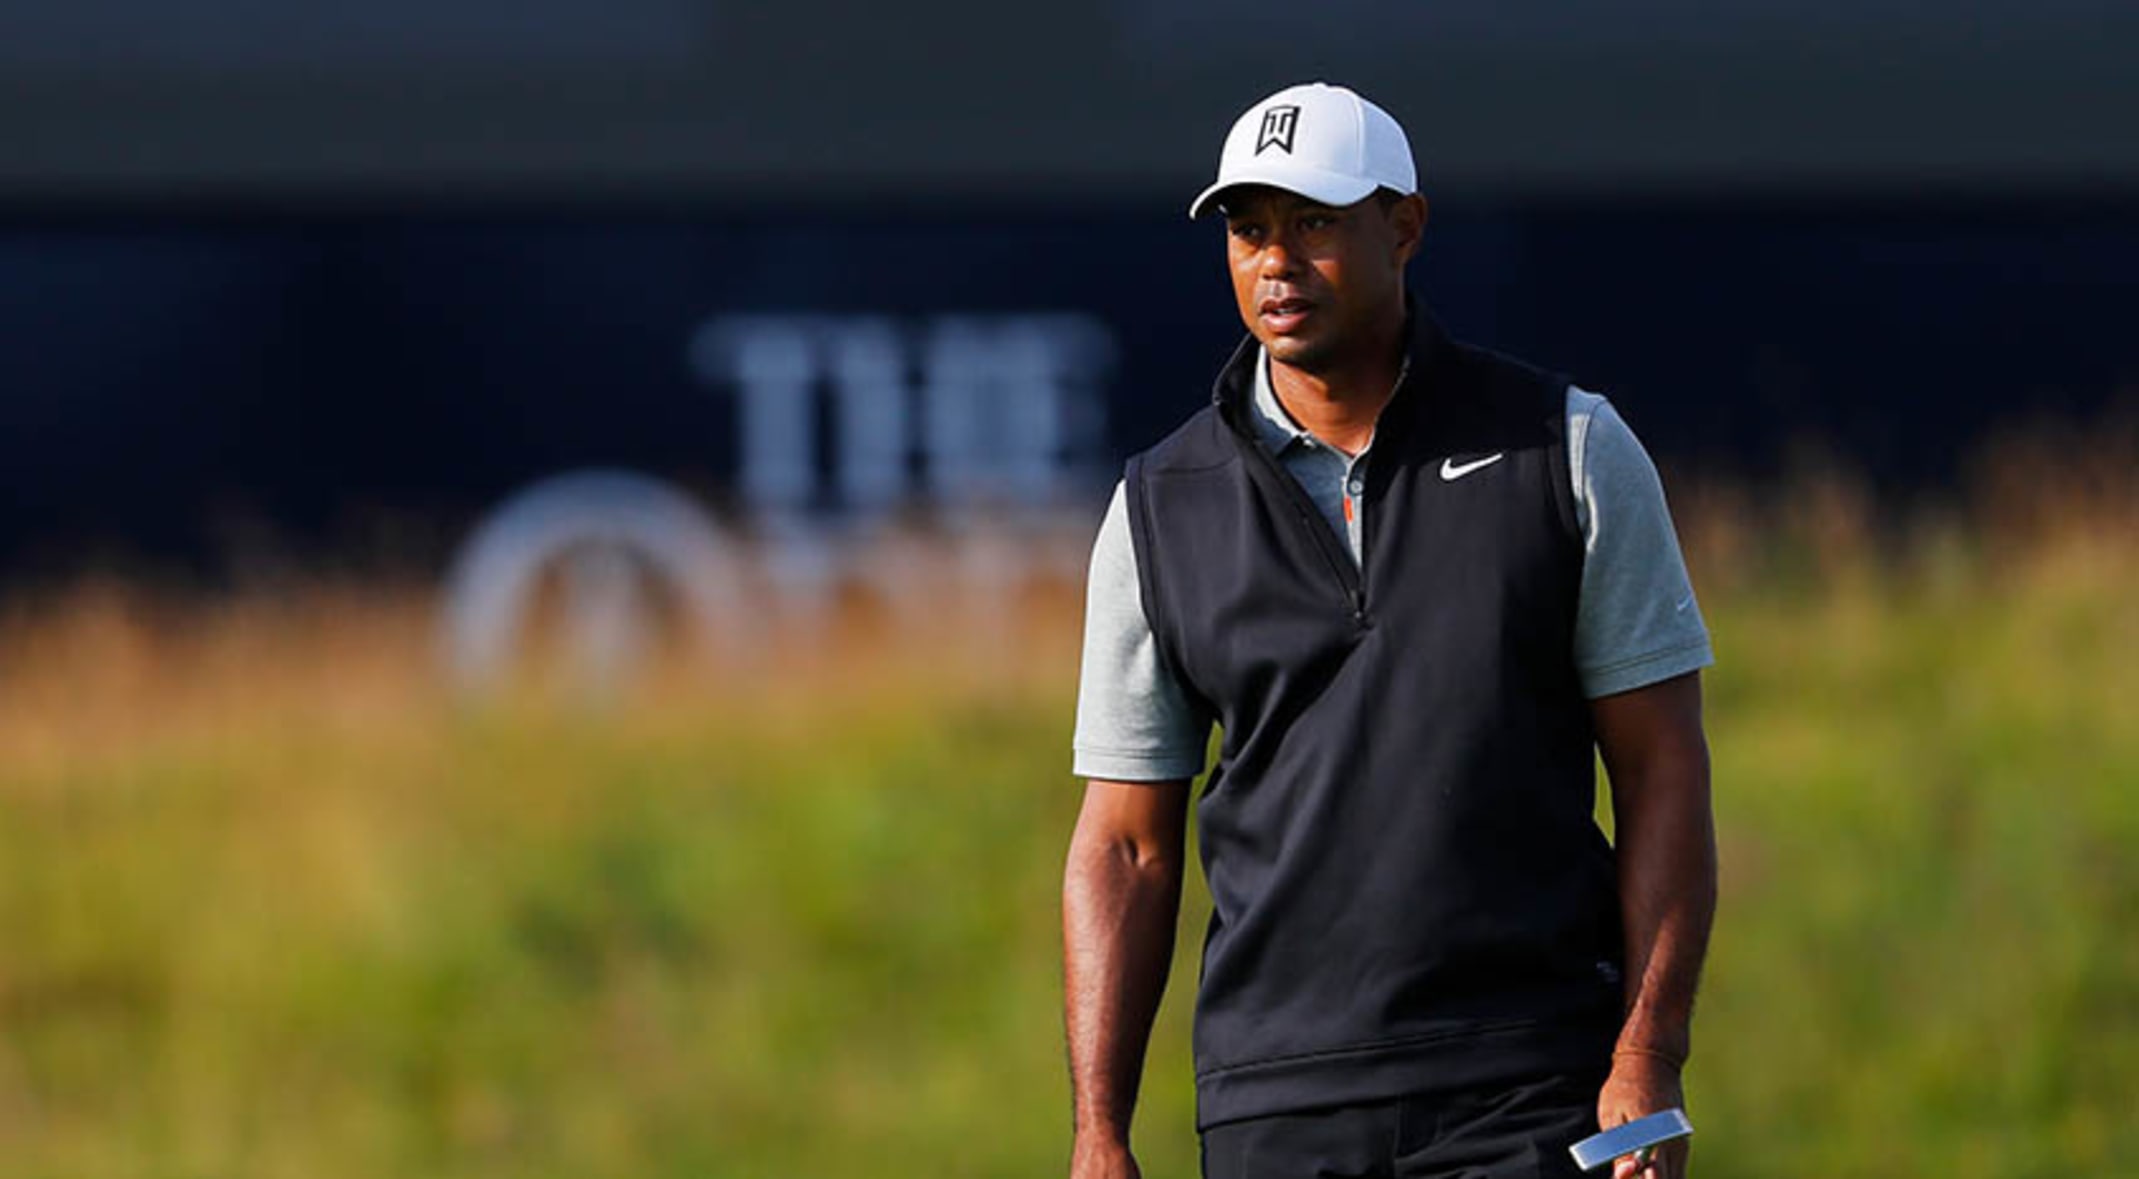 Tiger Woods Not Quite As Sharp As He Wants Entering The Open Championship